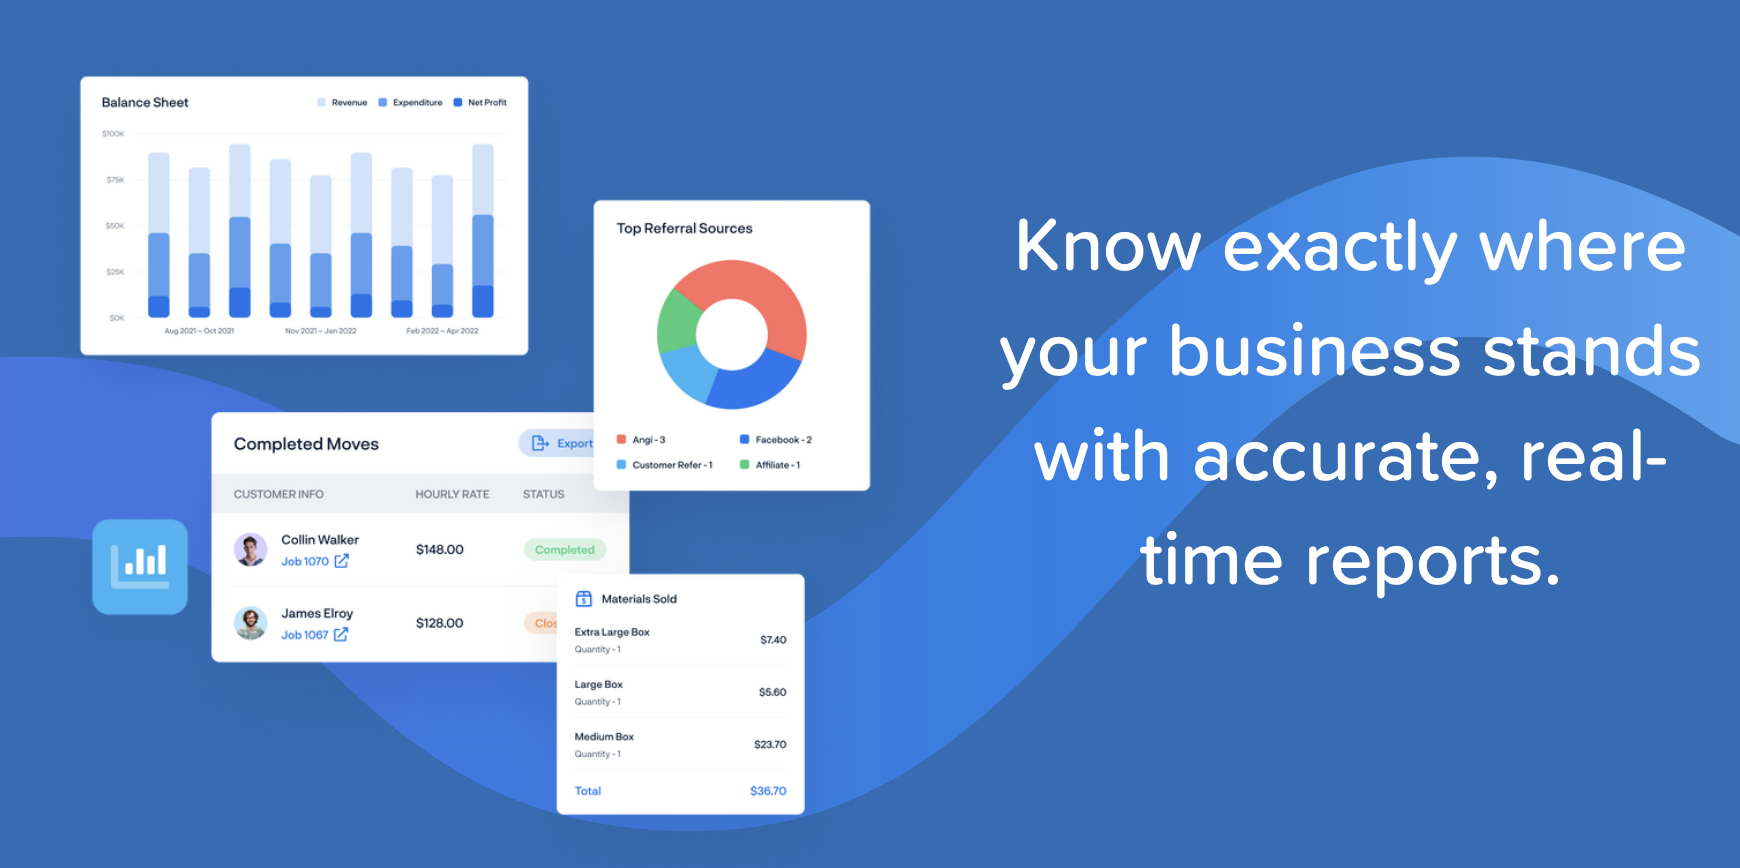 Know exactly where your business stands with accurate, real-time reports